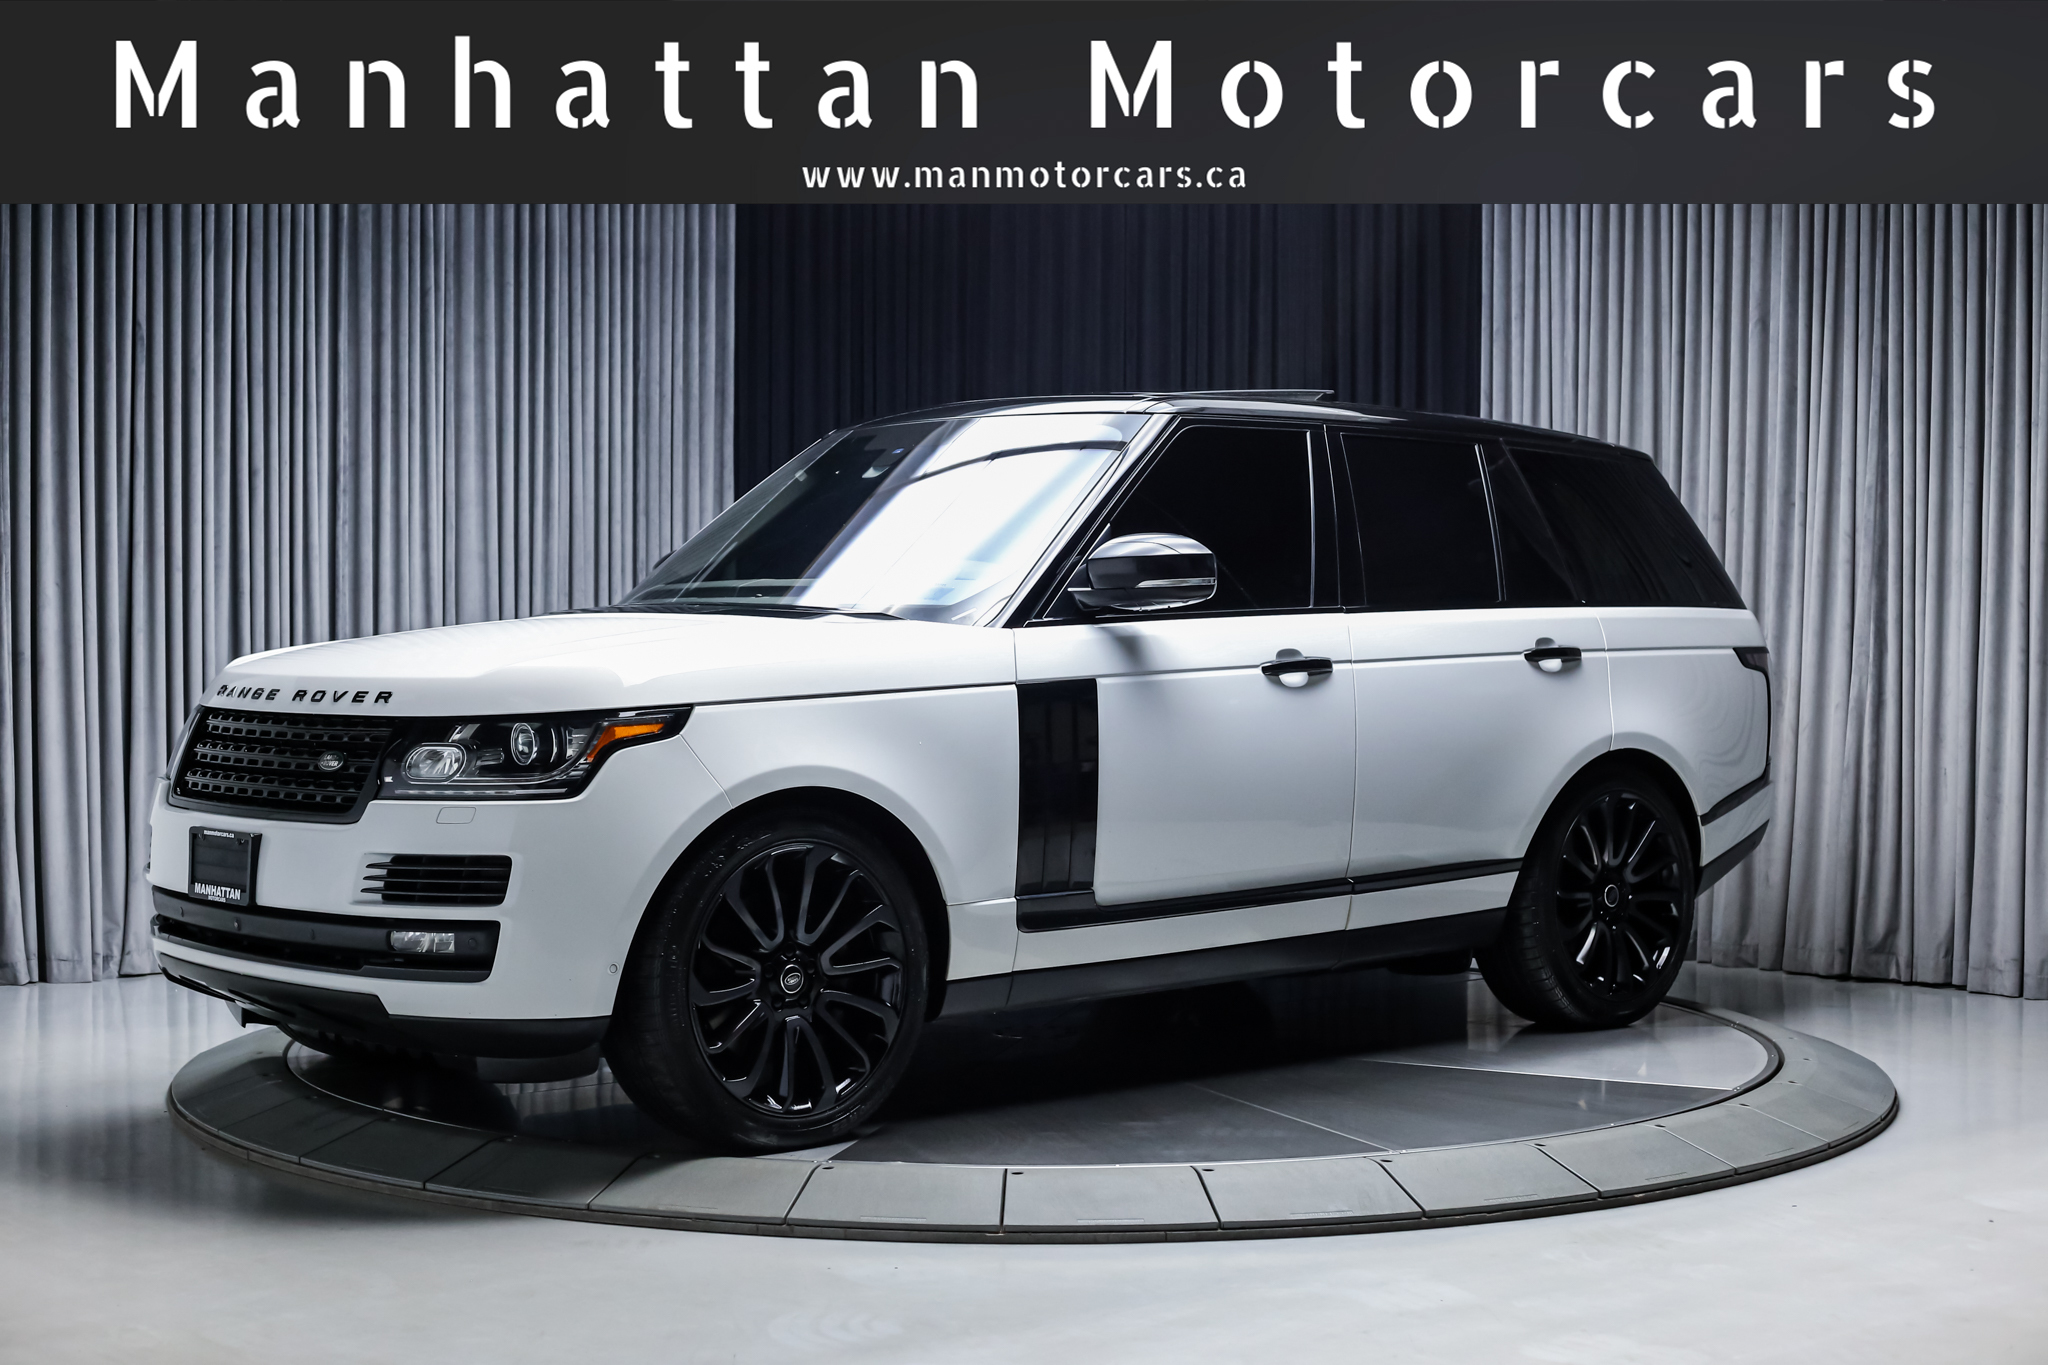 2016 Land Rover Range Rover SC FULL SIZE 510HP |SOFTCLOSE|360CAM|HUD|SERVICED